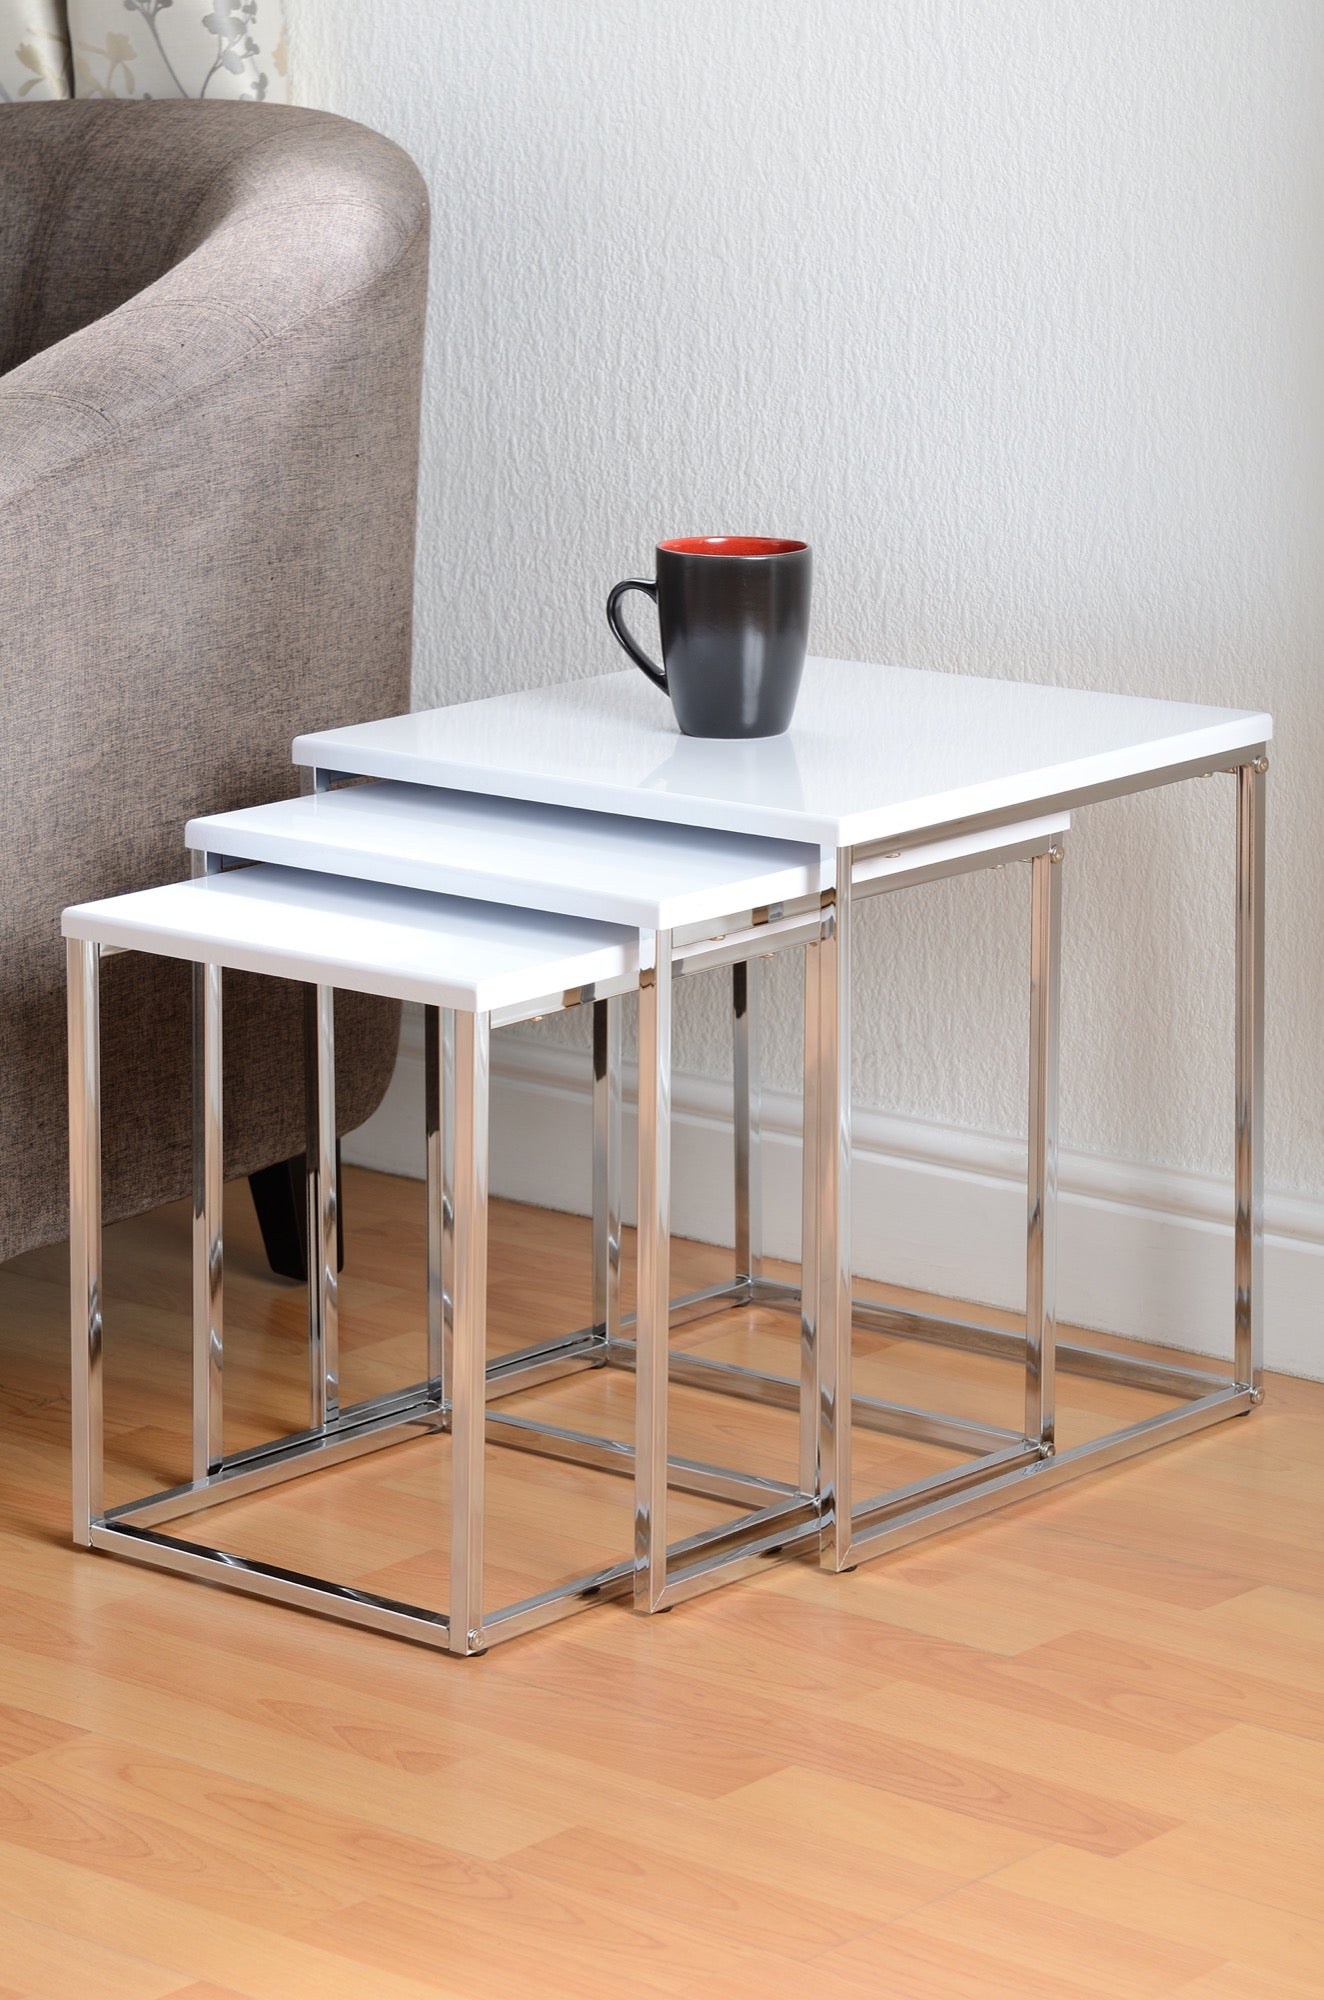 Charisma Nest Of Tables - White Gloss/Chrome - The Right Buy Store